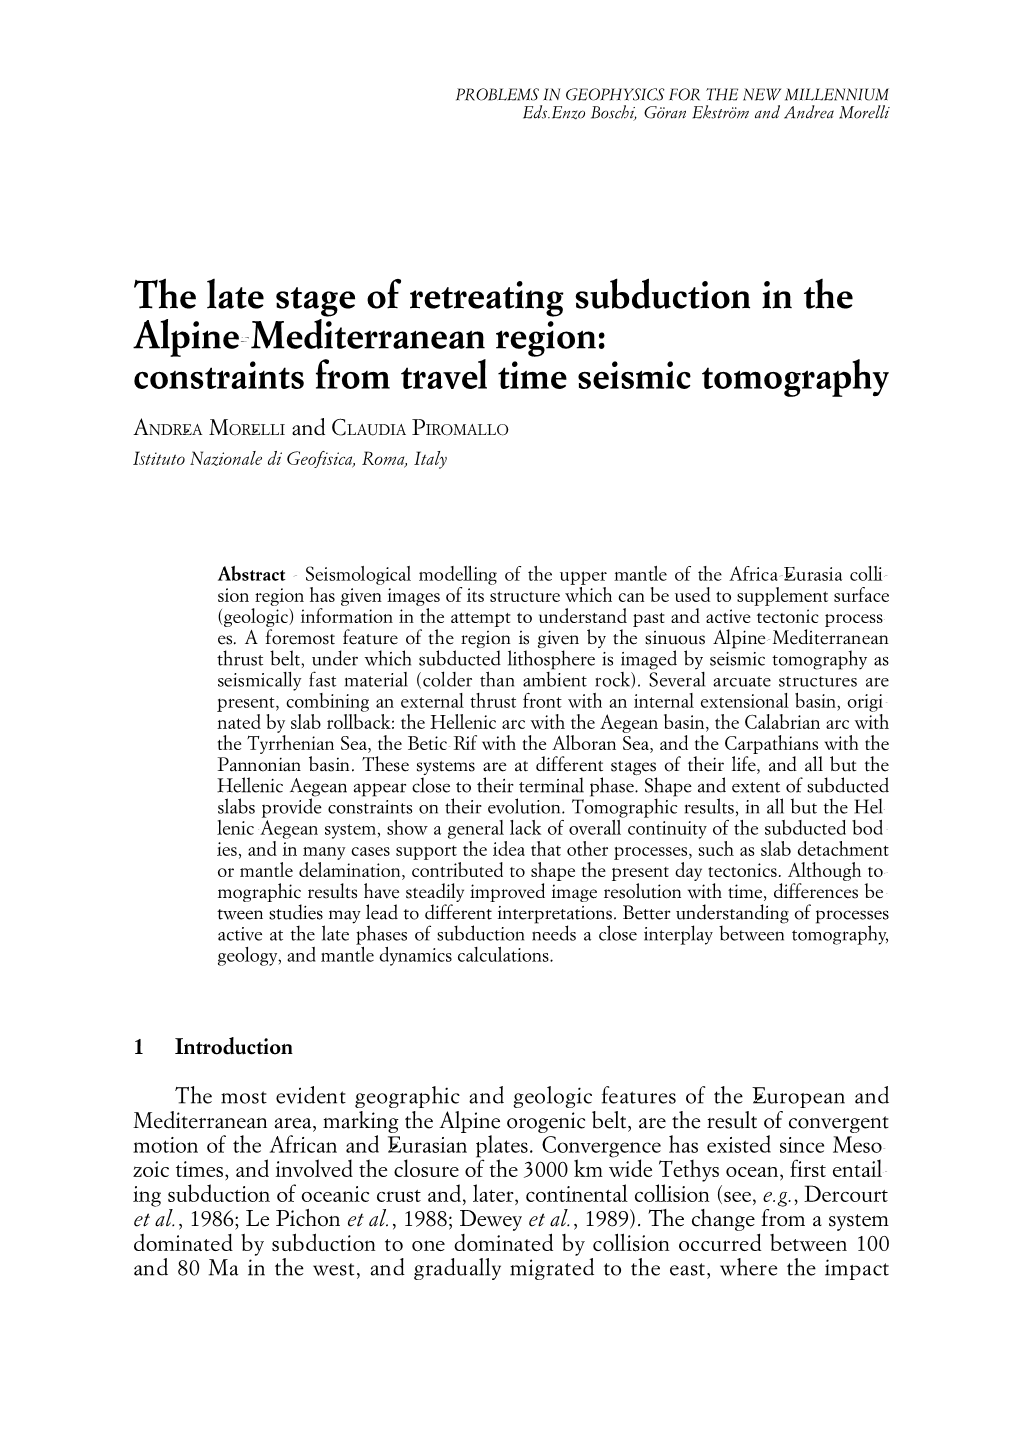 The Late Stage of Retreating Subduction in the Alpine-Mediterranean Region: Constraints from Travel Time Seismic Tomography